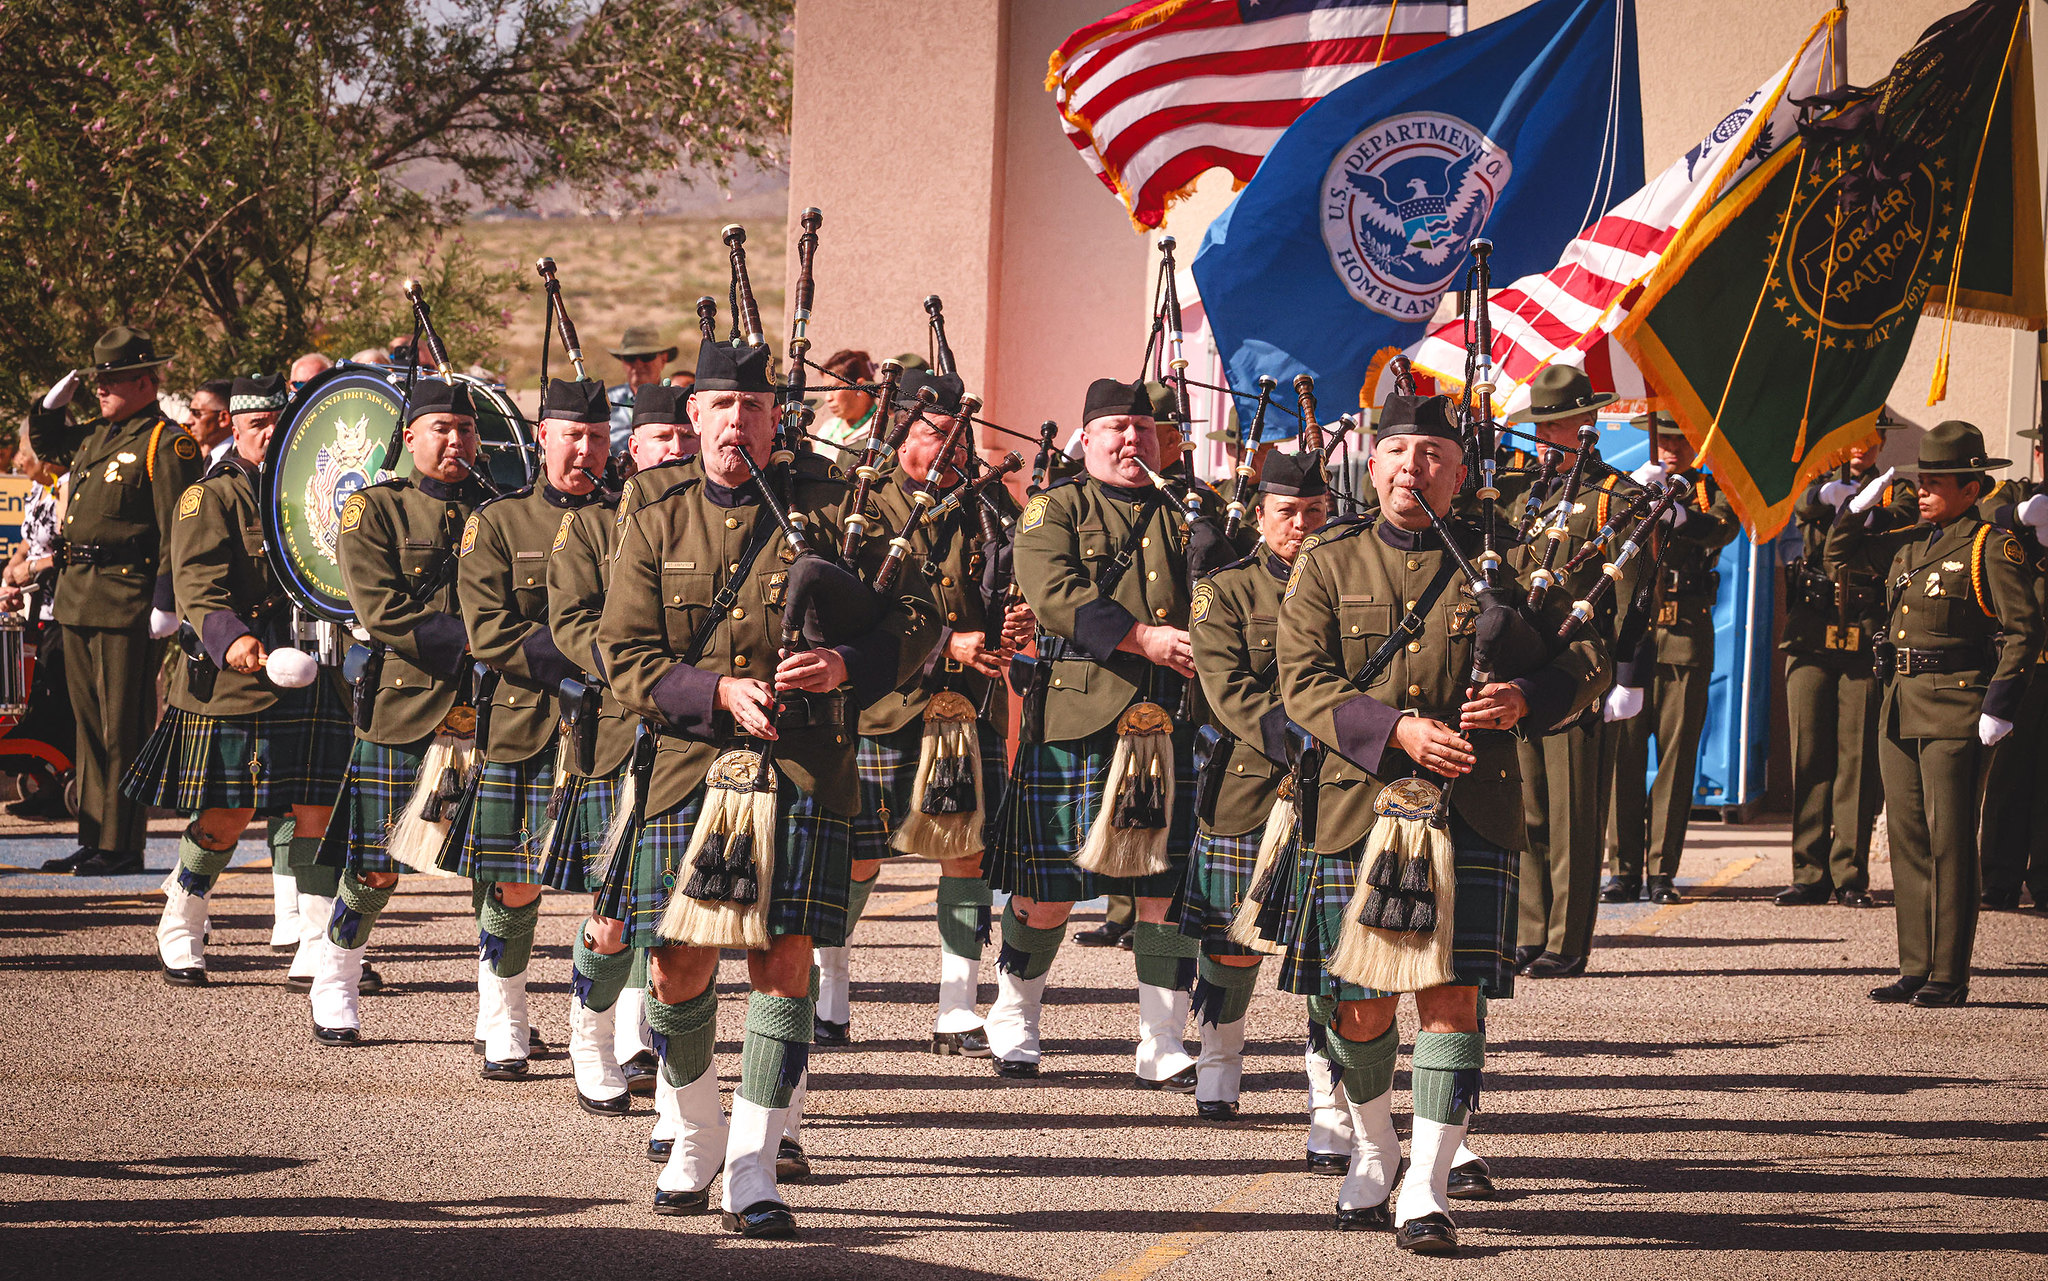 U.S. Border Patrol Pipes and Drums perform in a ceremony in Texas.